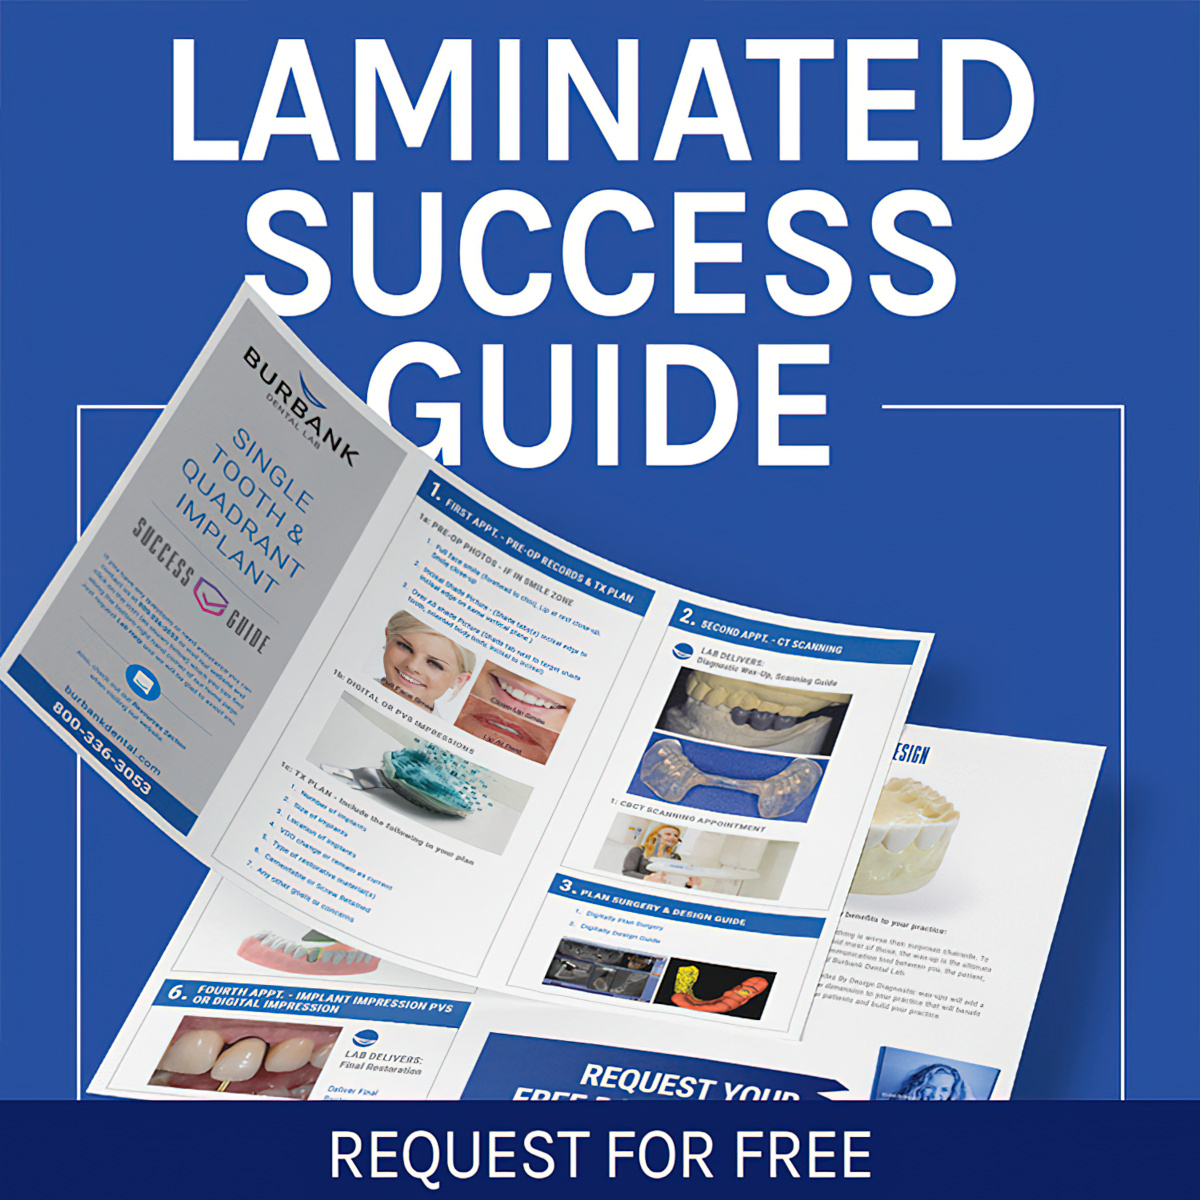 Request a free laminated Success Guide by Burbank Dental Lab